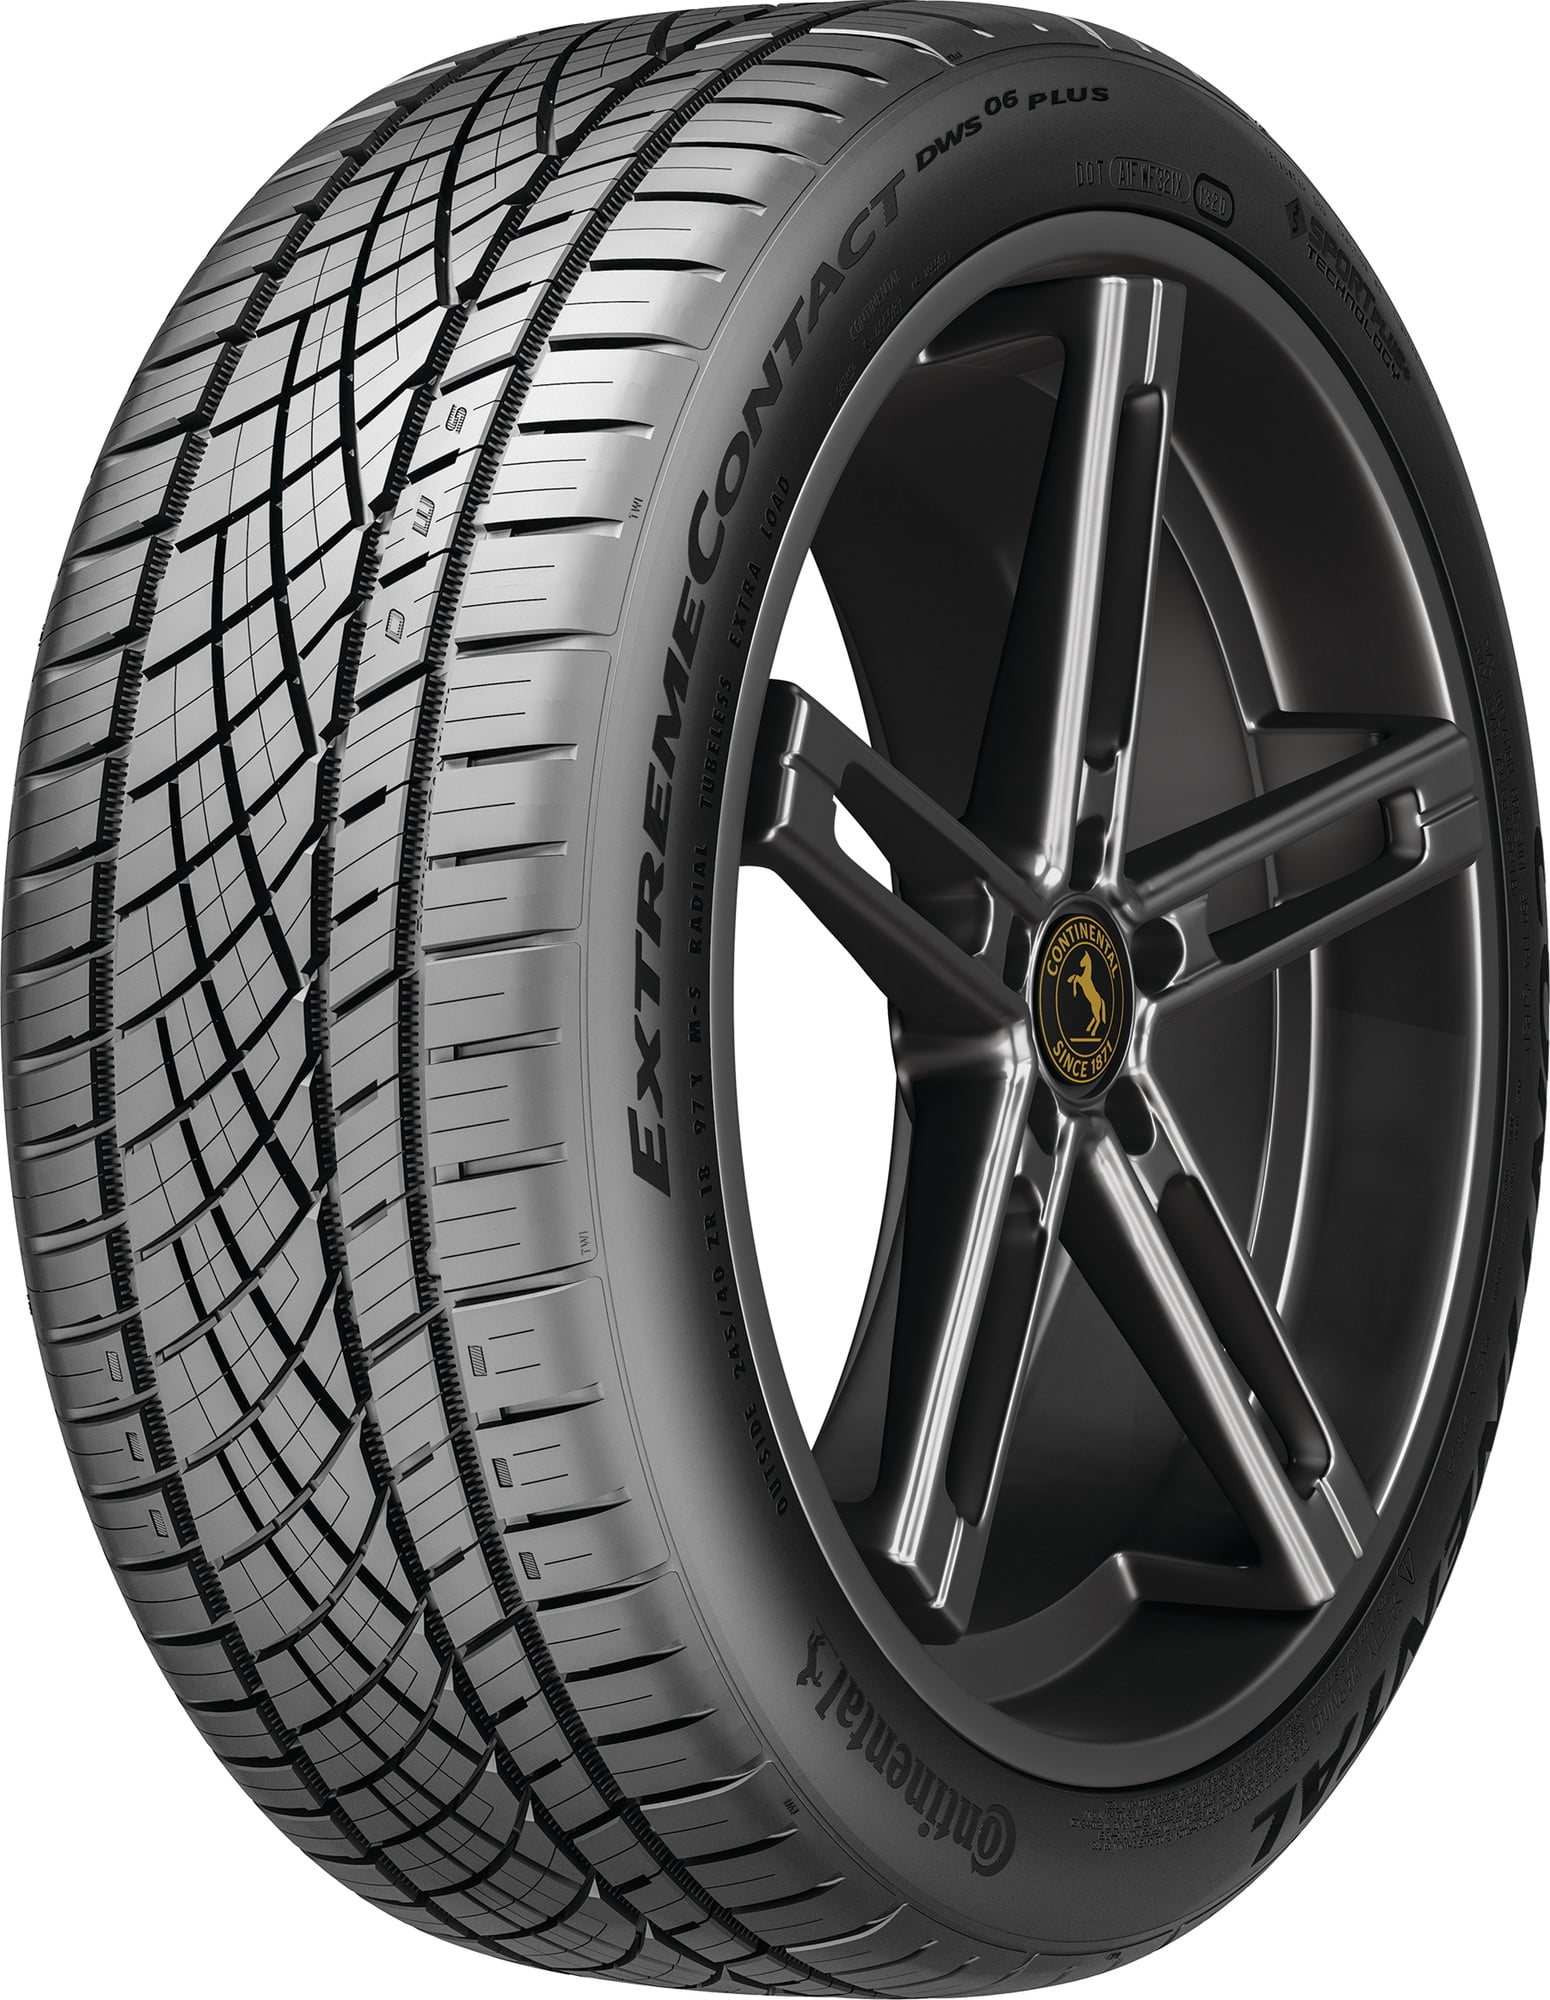 Continental ExtremeContact DWS06 PLUS UHP All Season 315/35ZR22 111Y XL  Passenger Tire